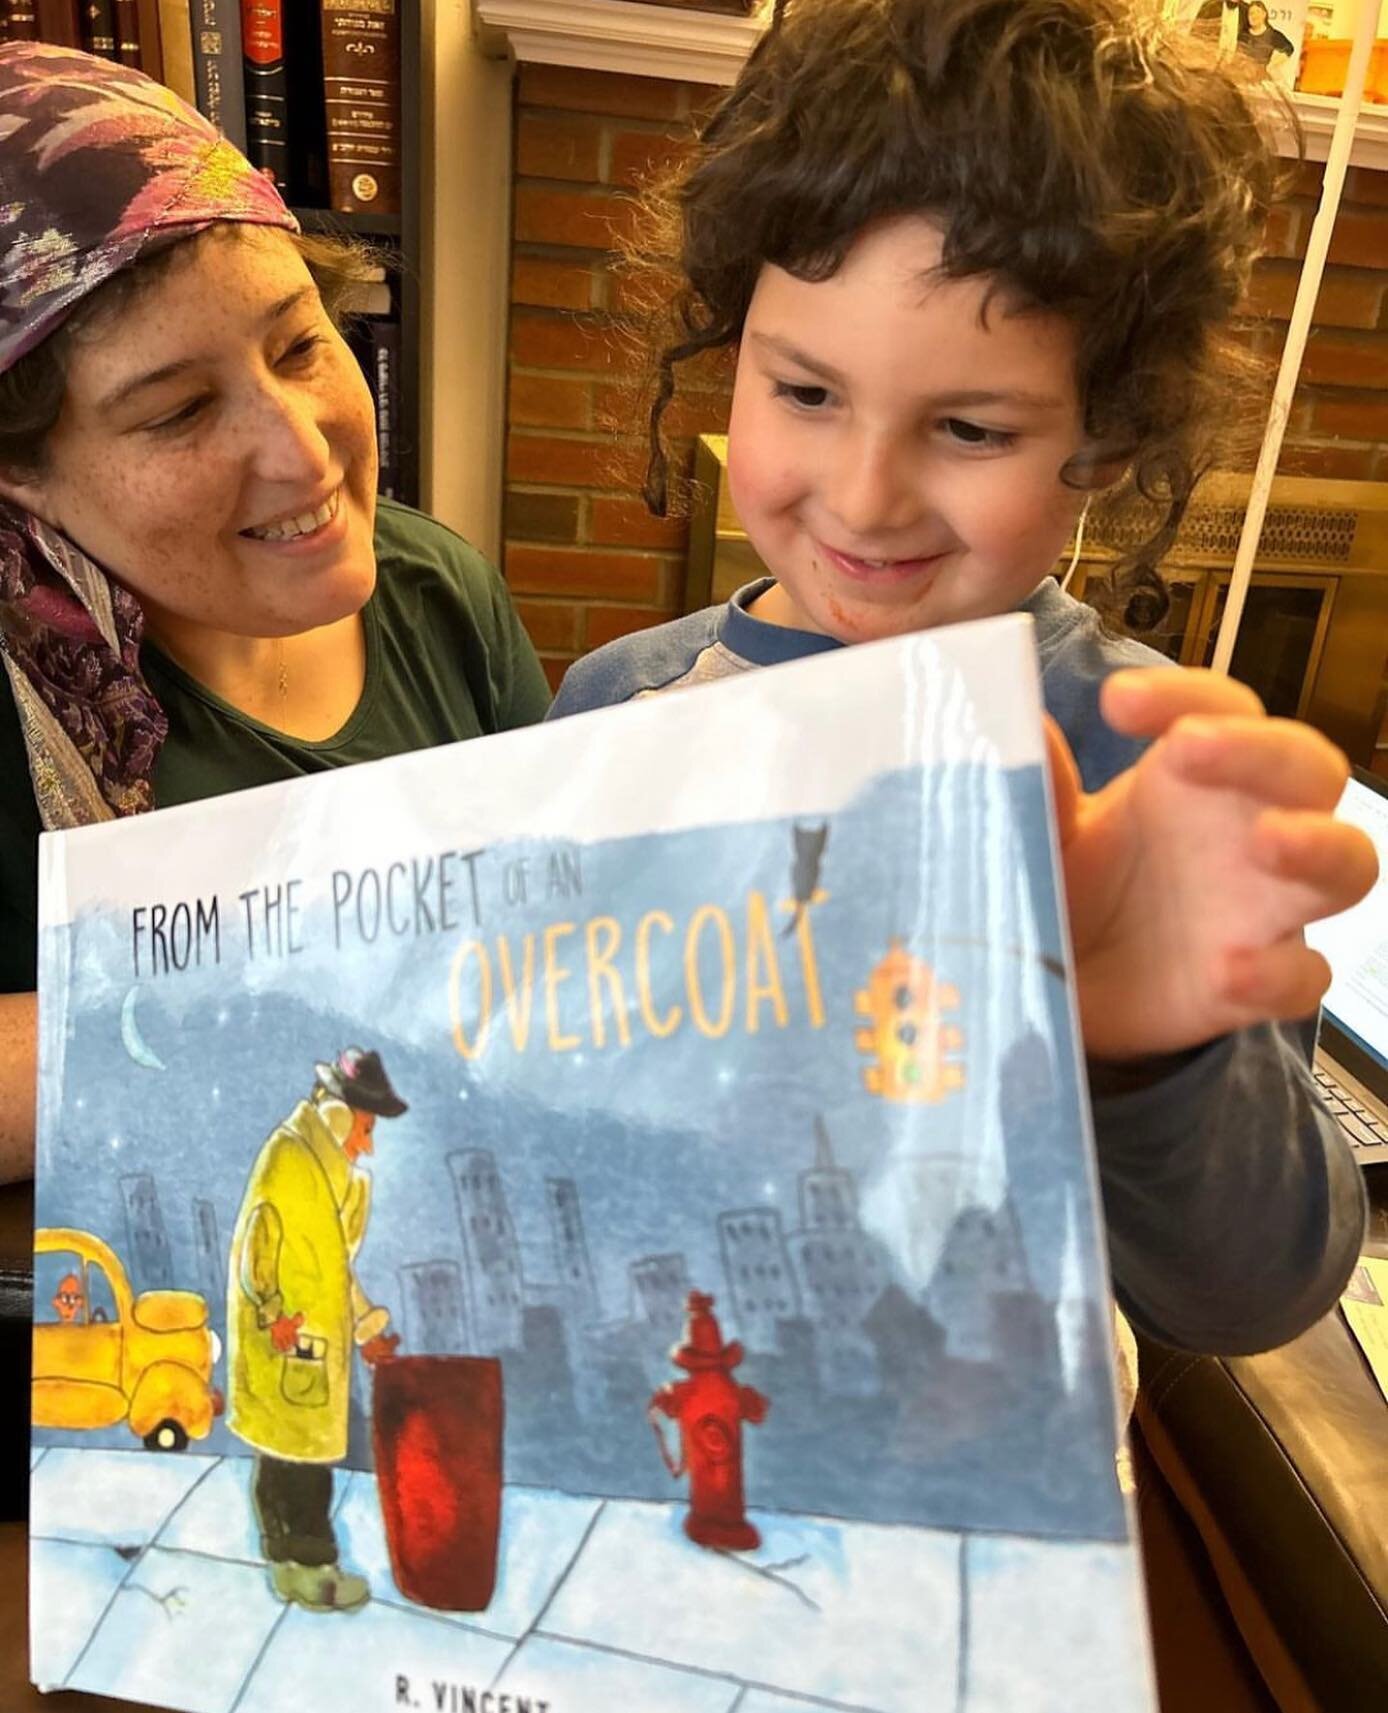 Now THAT is one happy, happy #MaxBuckles fan. Thank you Henry for sharing your fandom 😀. #fromthepocketofanovercoat #readshareenjoymax #maxbucklesbooks